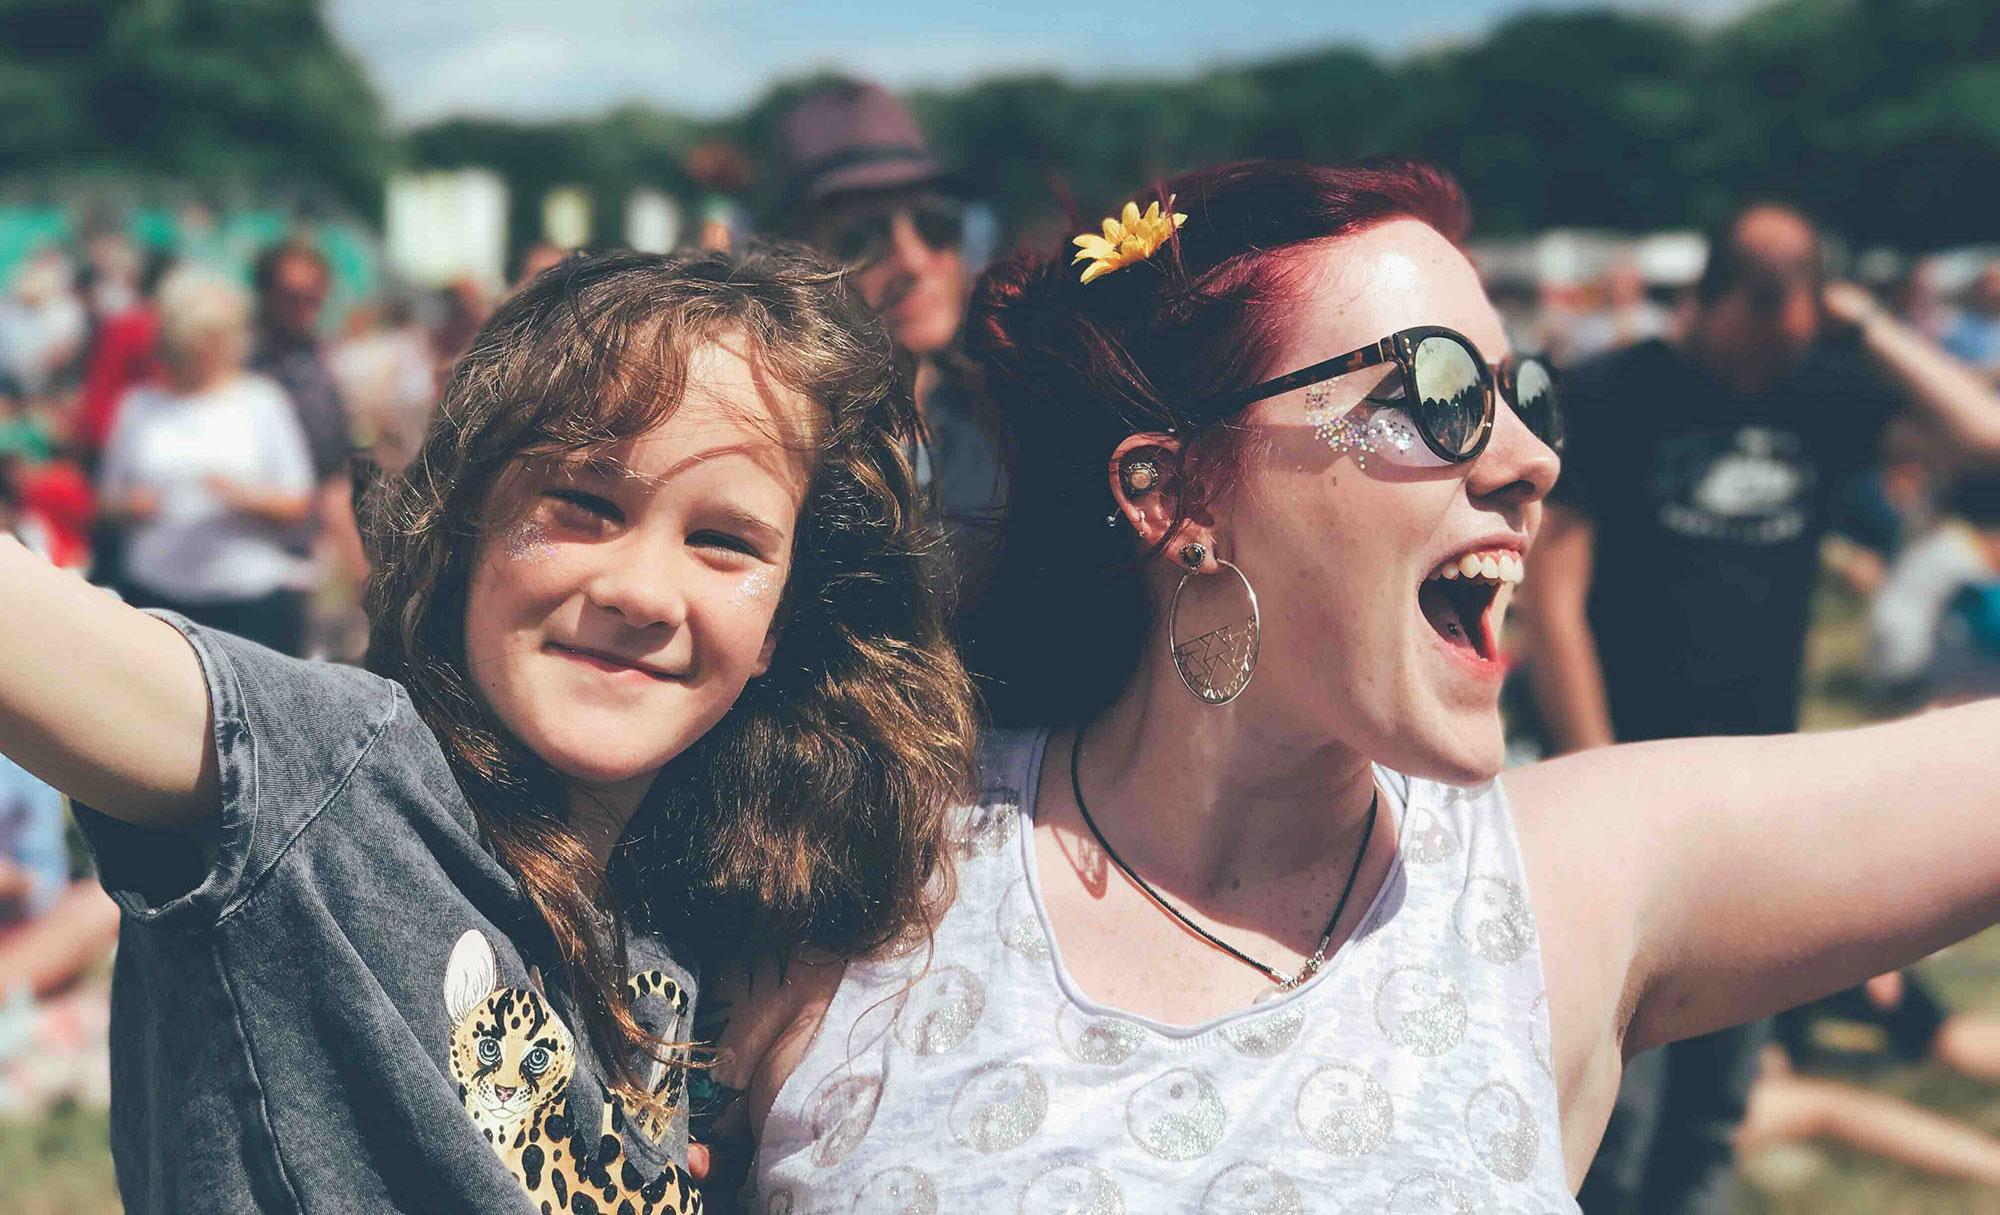 a girl and a woman at a festival